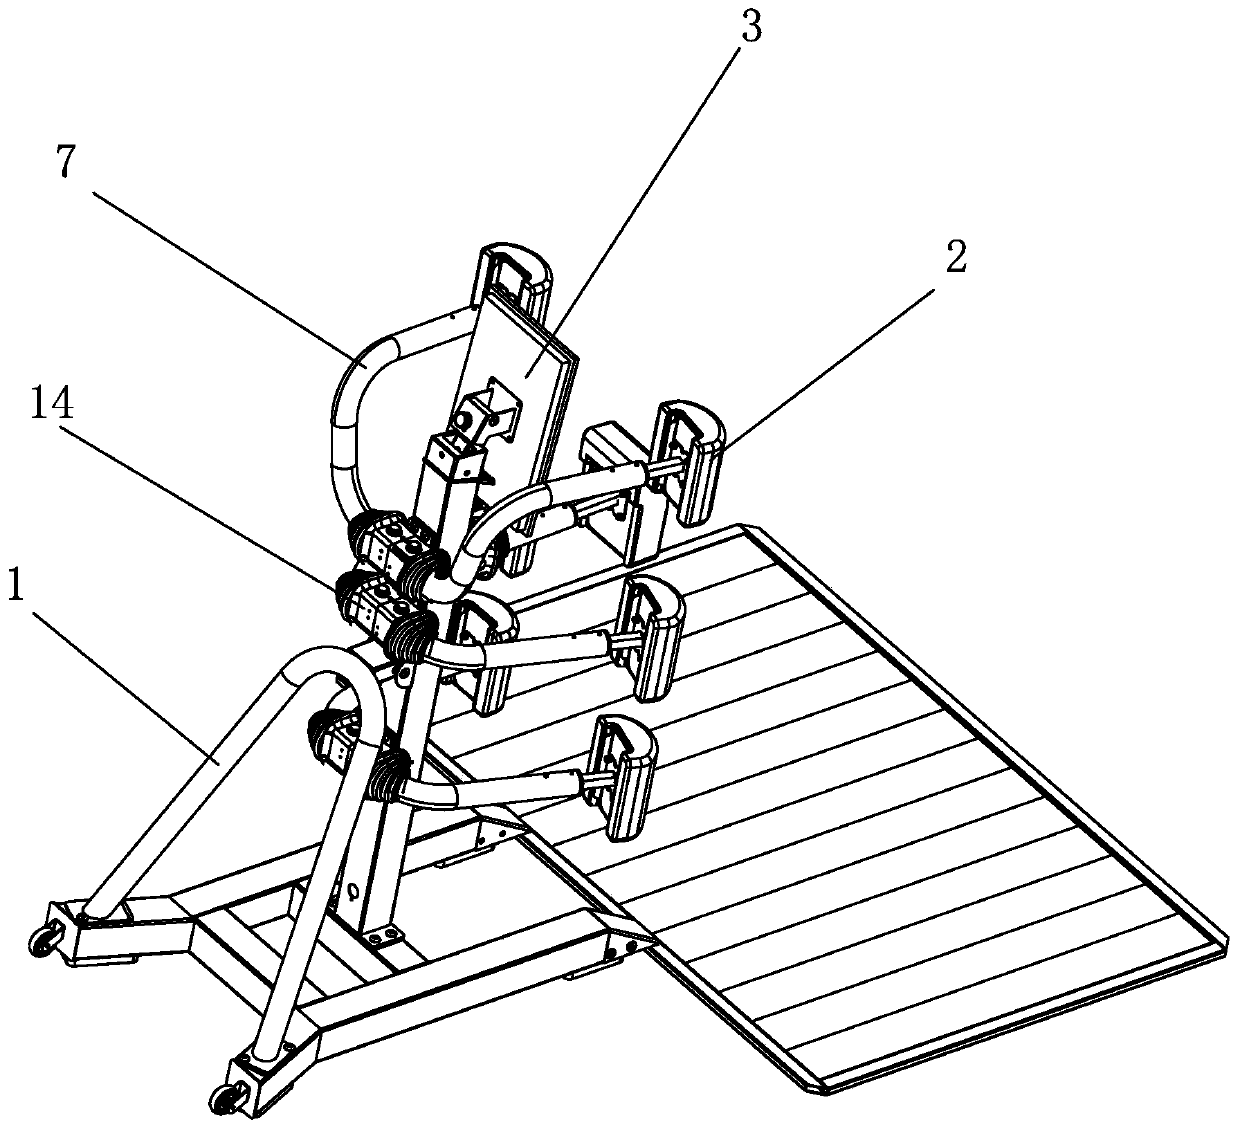 A connecting arm structure used in an intelligent boxing frame